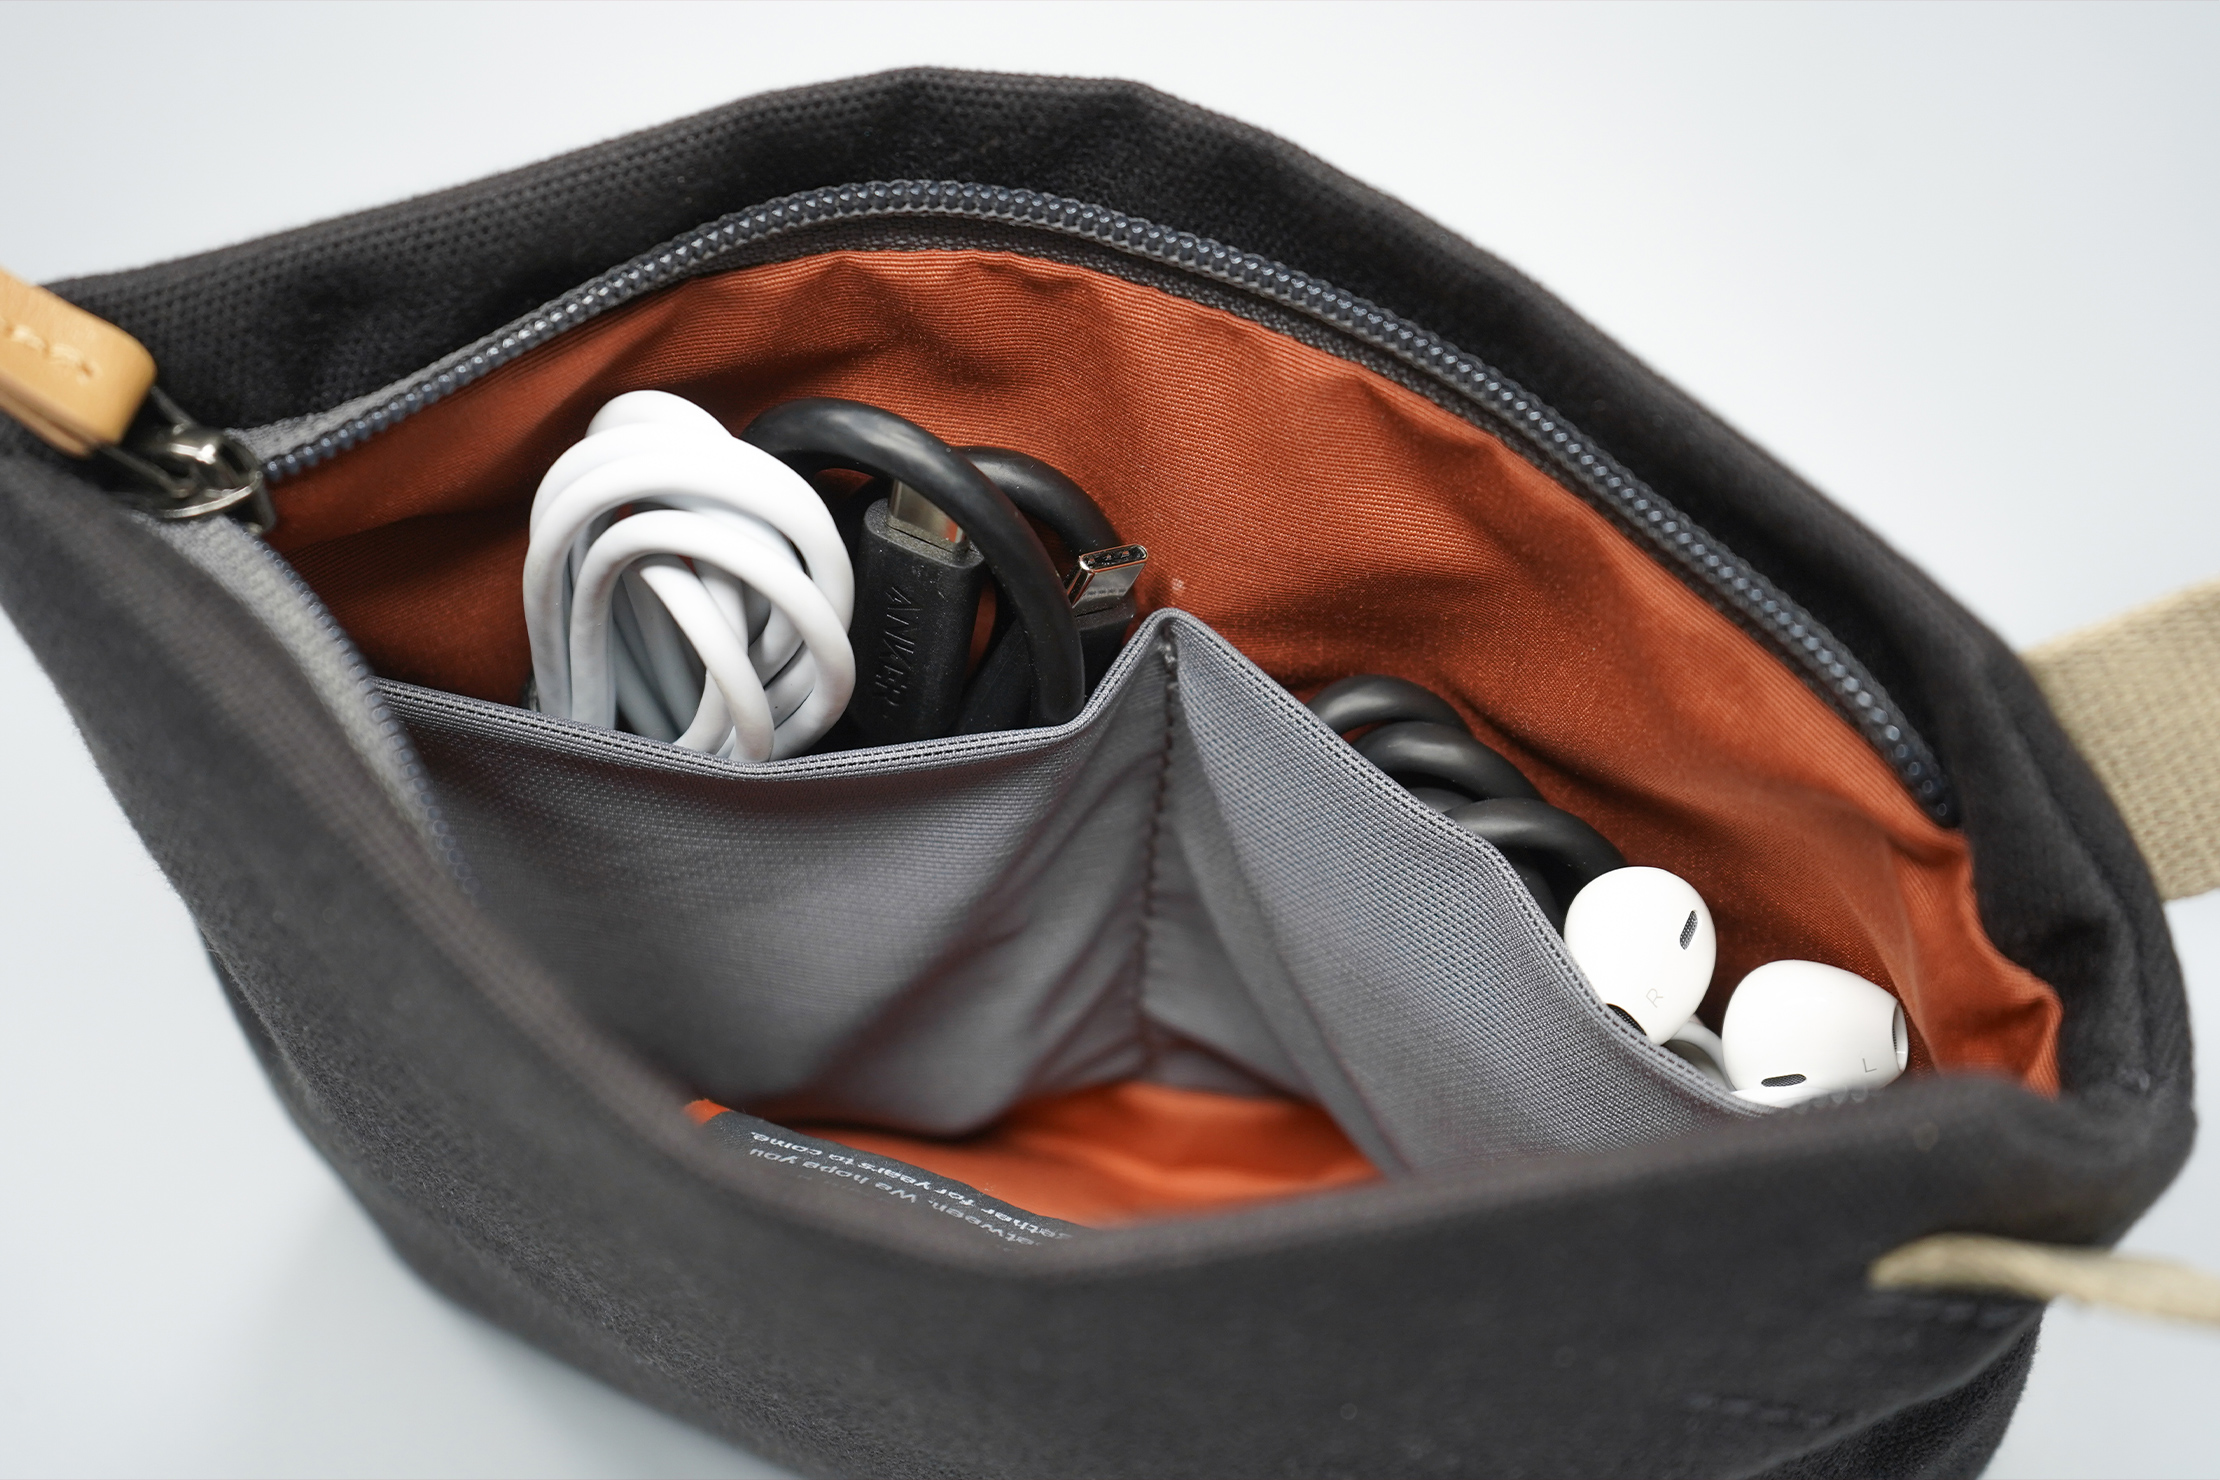 Bellroy Standing Pouch | The mesh is elastic but doesn't feel it would easily get worn out